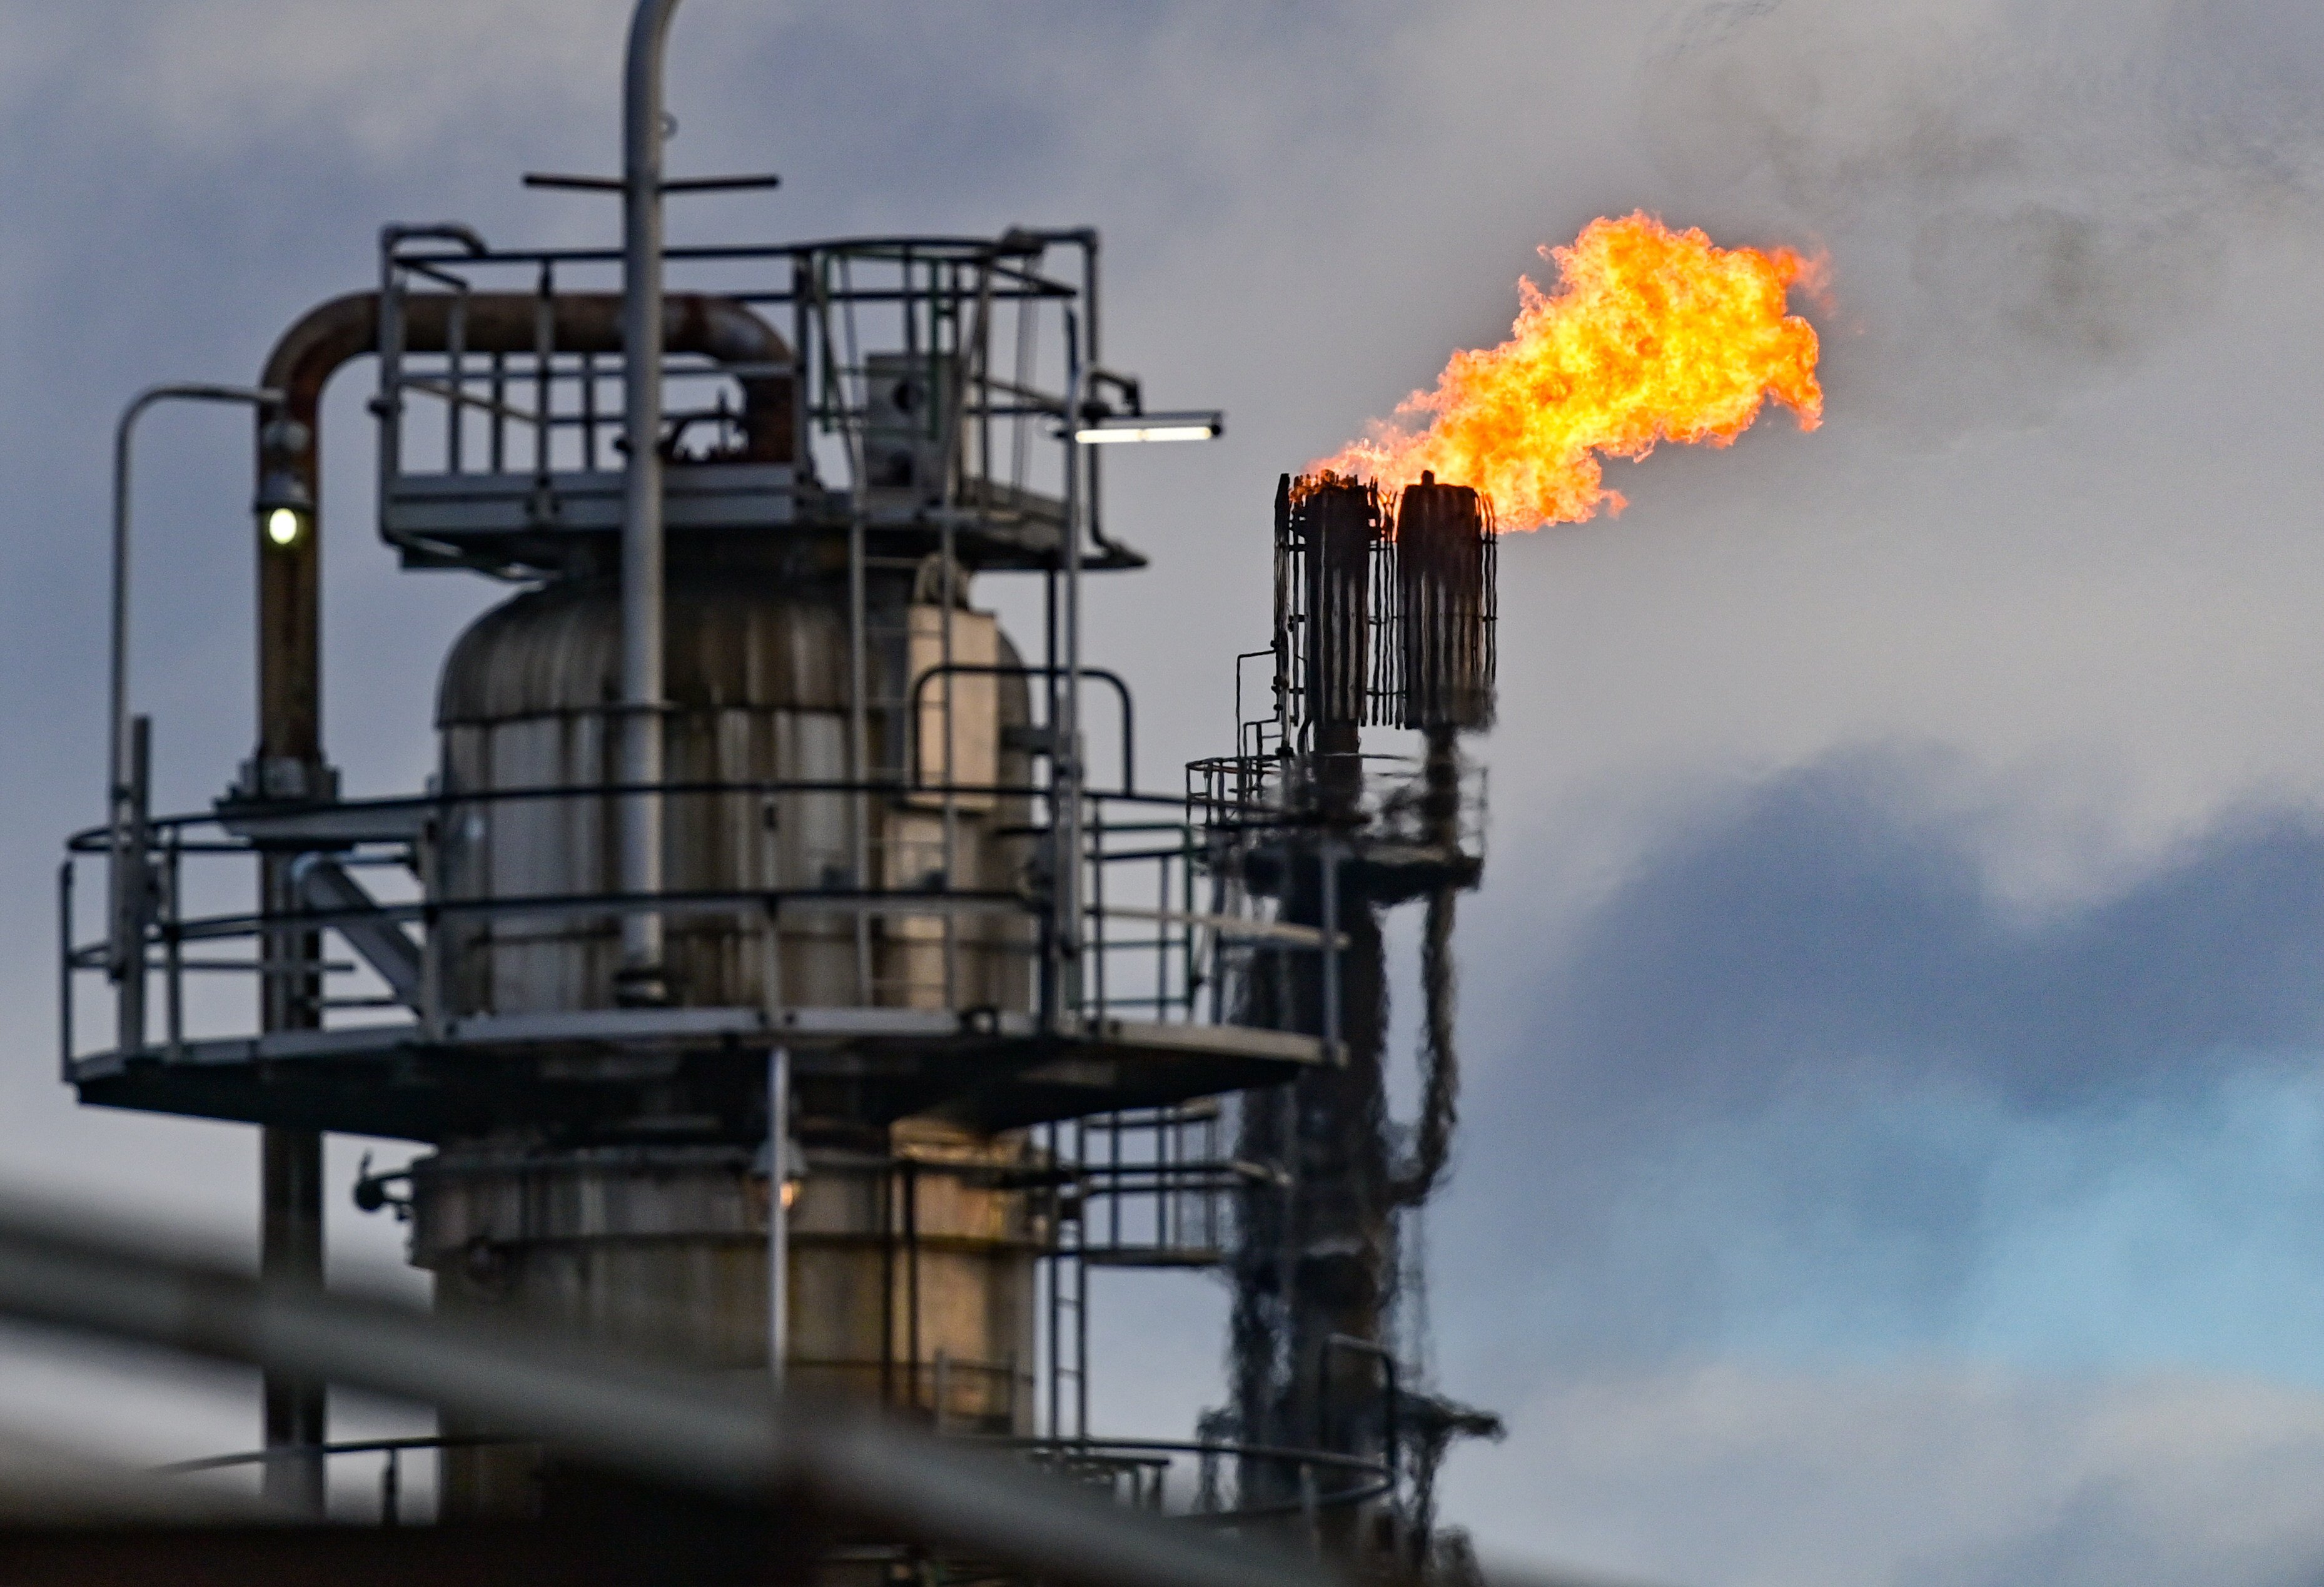 Surplus gas is burnt off at the crude oil processing plant of PCK Raffinerie in Brandenburg, Germany on February 25. The German government says it will free up some of its national oil reserves in response to the conflict in Ukraine and rising oil prices. Photo: DPA